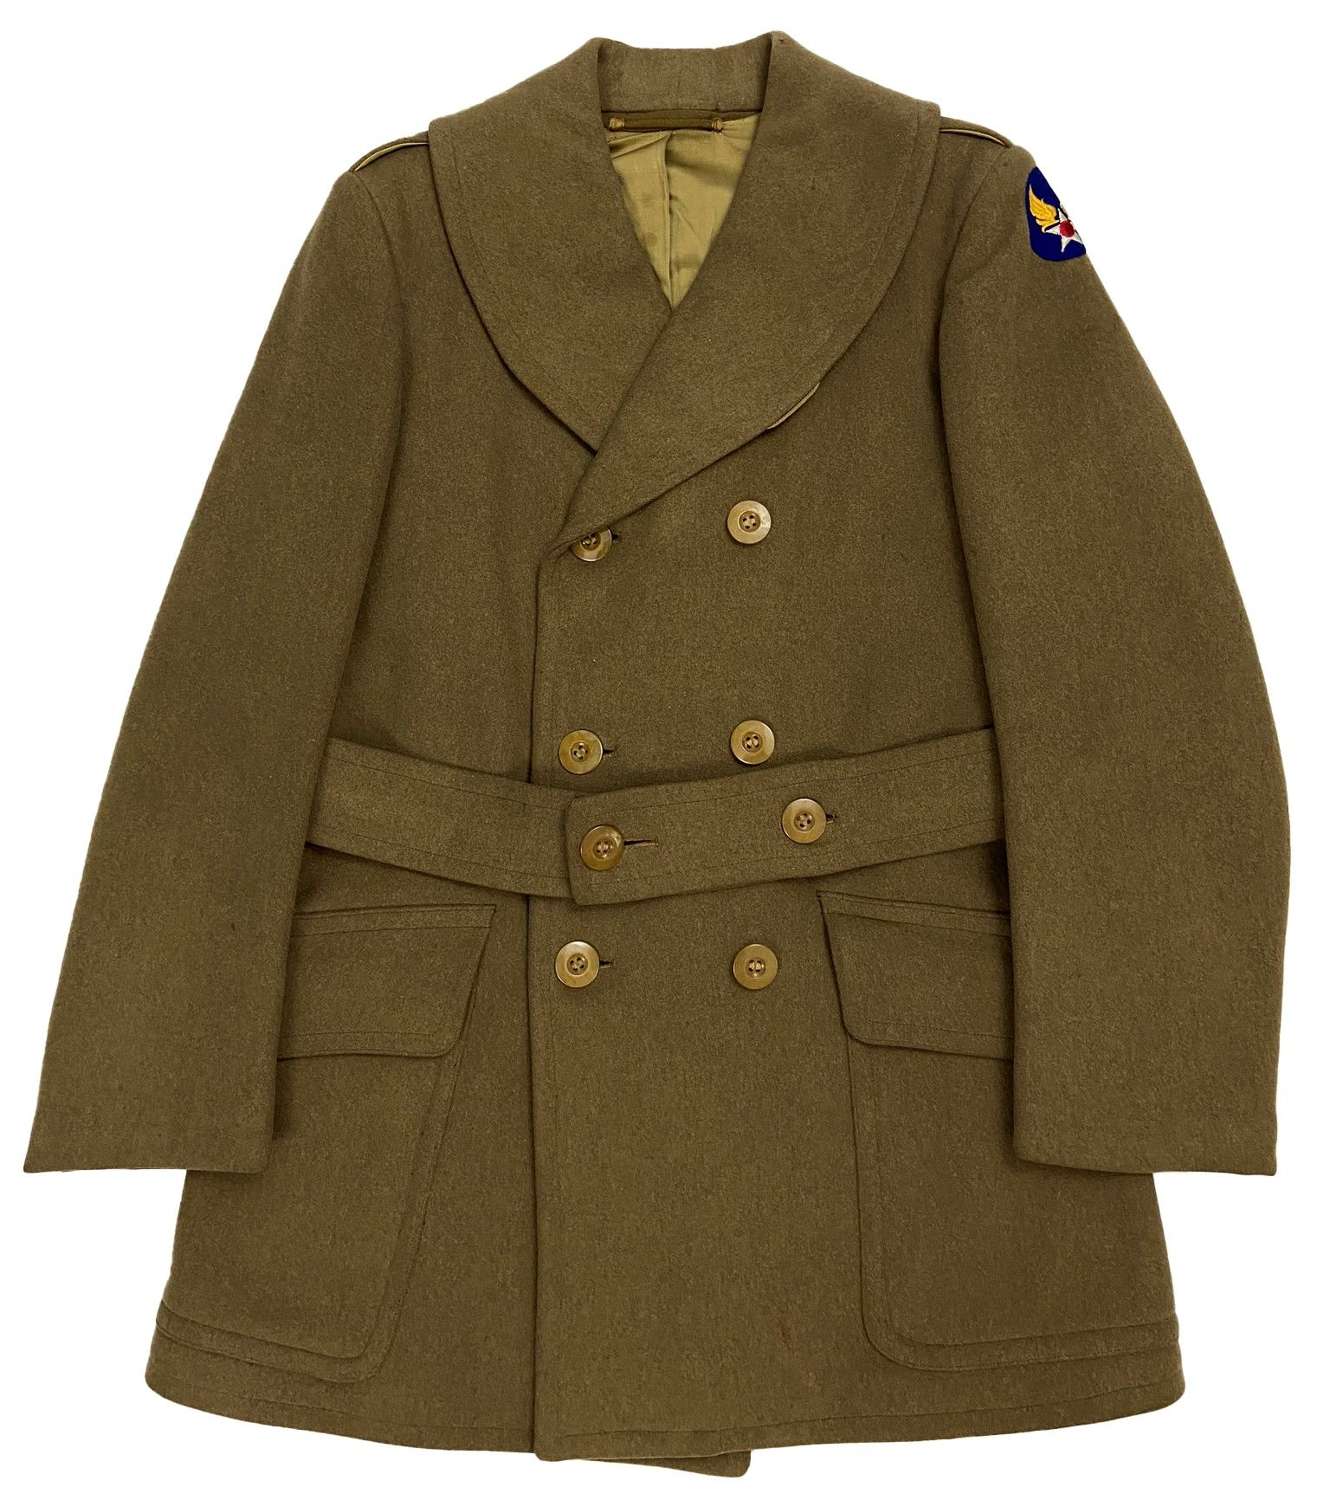 Original Early WW2 USAAF Officers Short Overcoat - Size 39S